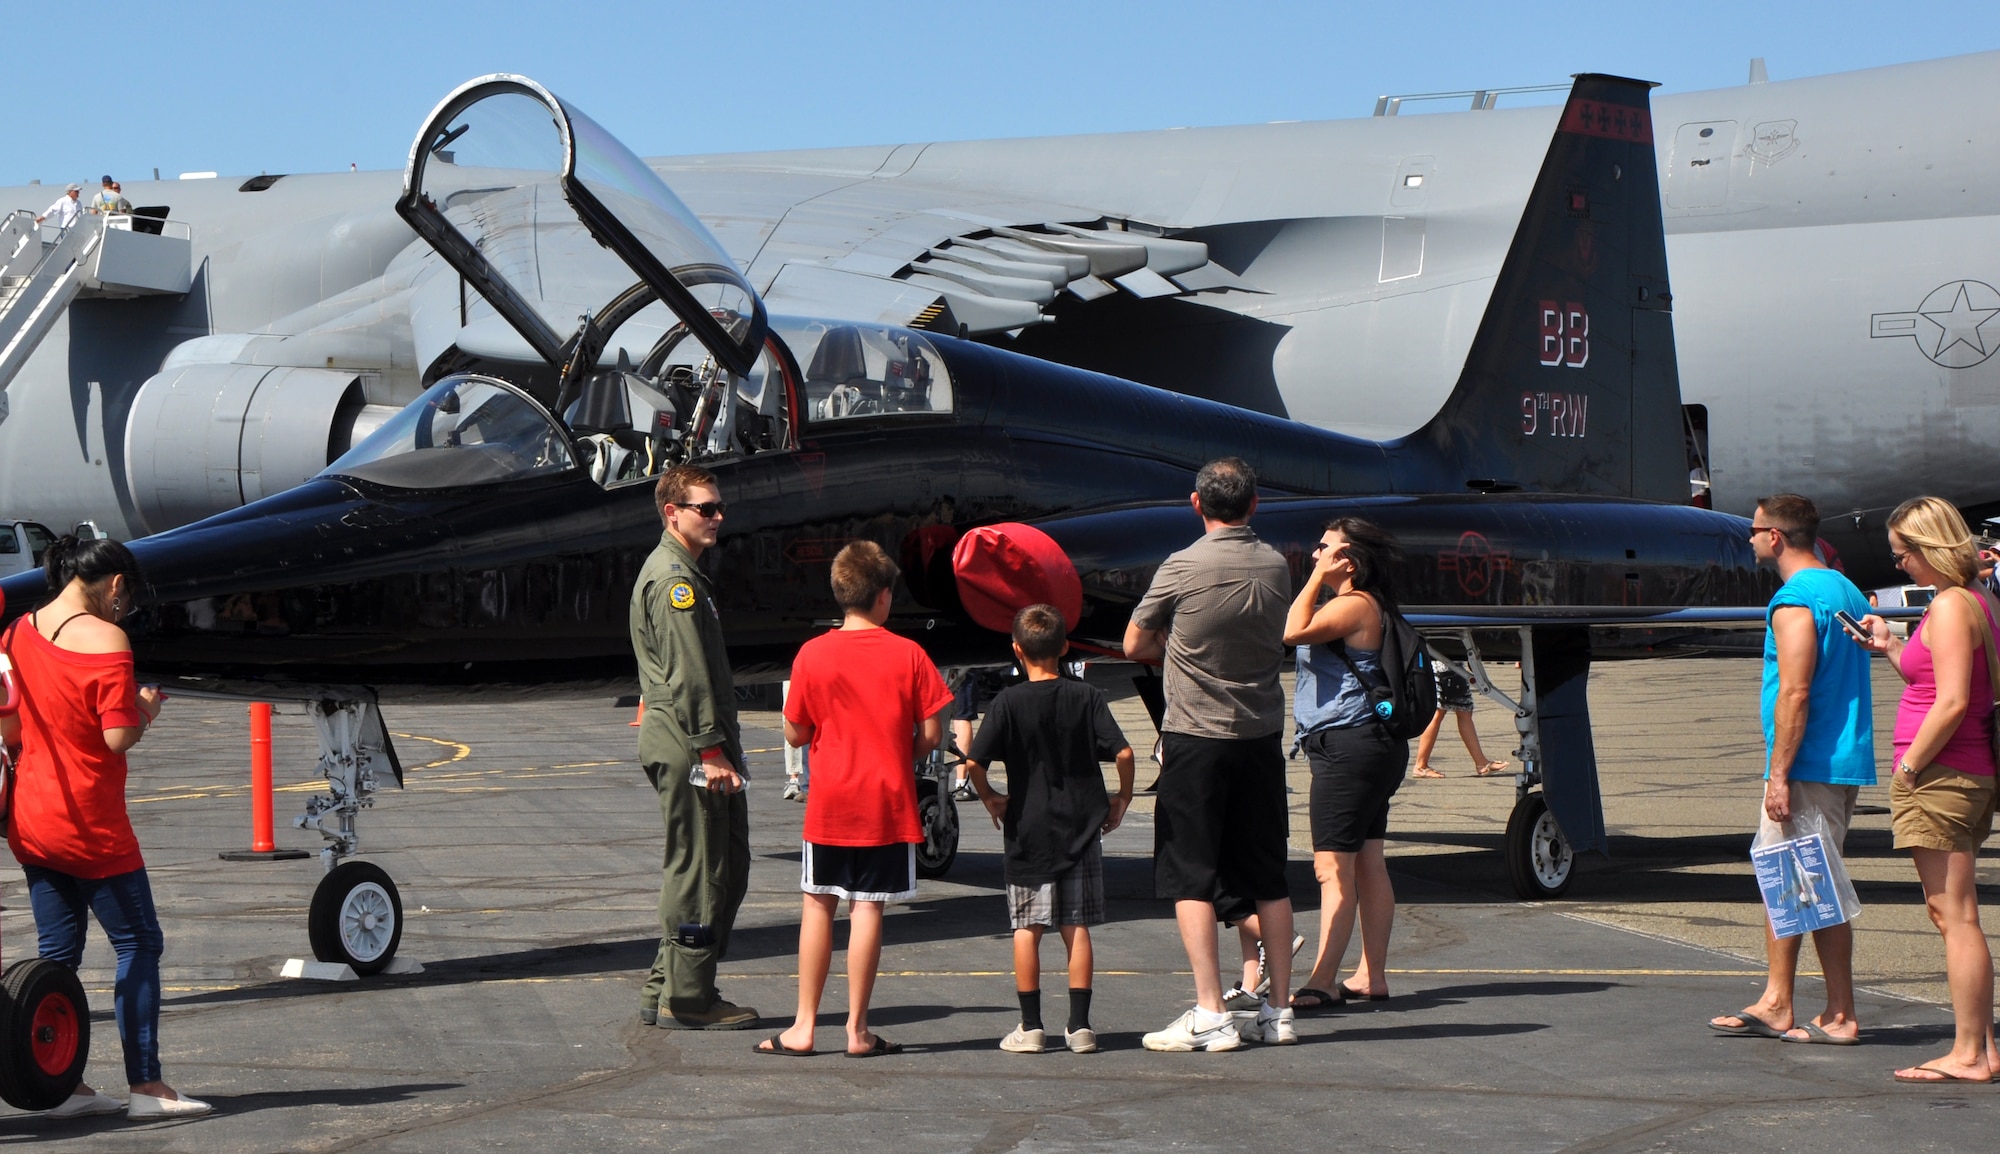 A pilot from Beale Air Force Base answers questions about the Air Force T-38 Talon trainer aircraft static display at the Capital City Air Show at Mather Airport, Sacramento, Calif., Sept. 8, 2012. The Talon is primarily used by Air Education and Training Command for joint specialized undergraduate pilot training. (U.S. Air Force photo by Staff Sgt. Robert M. Trujillo)